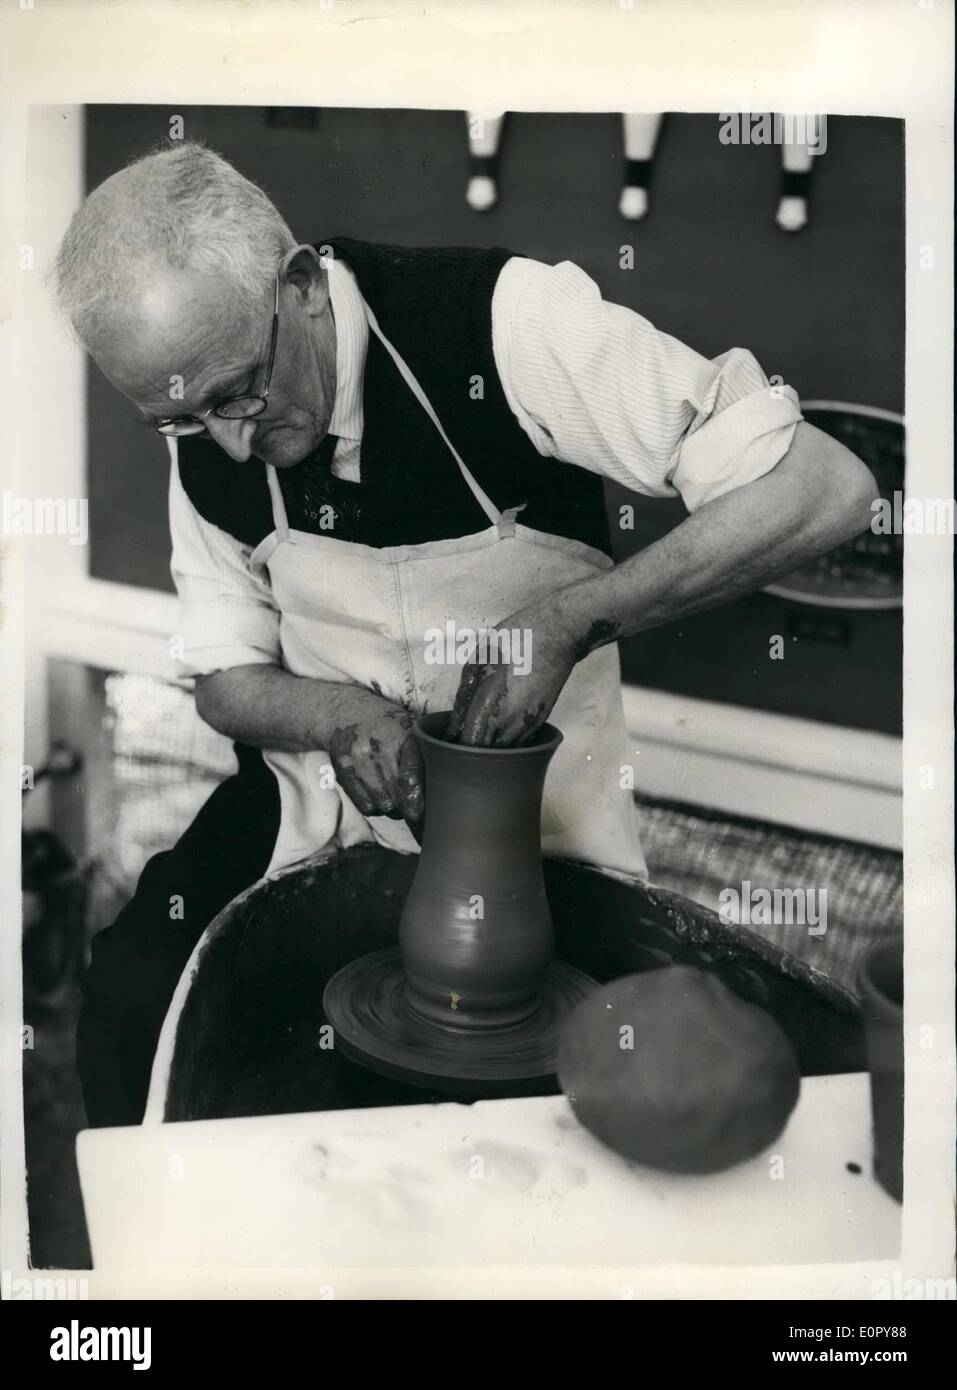 May 05, 1957 - Rural Industries Exhibition In London A Potter At Work: Many interesting items of country life are to be seen at Stock Photo